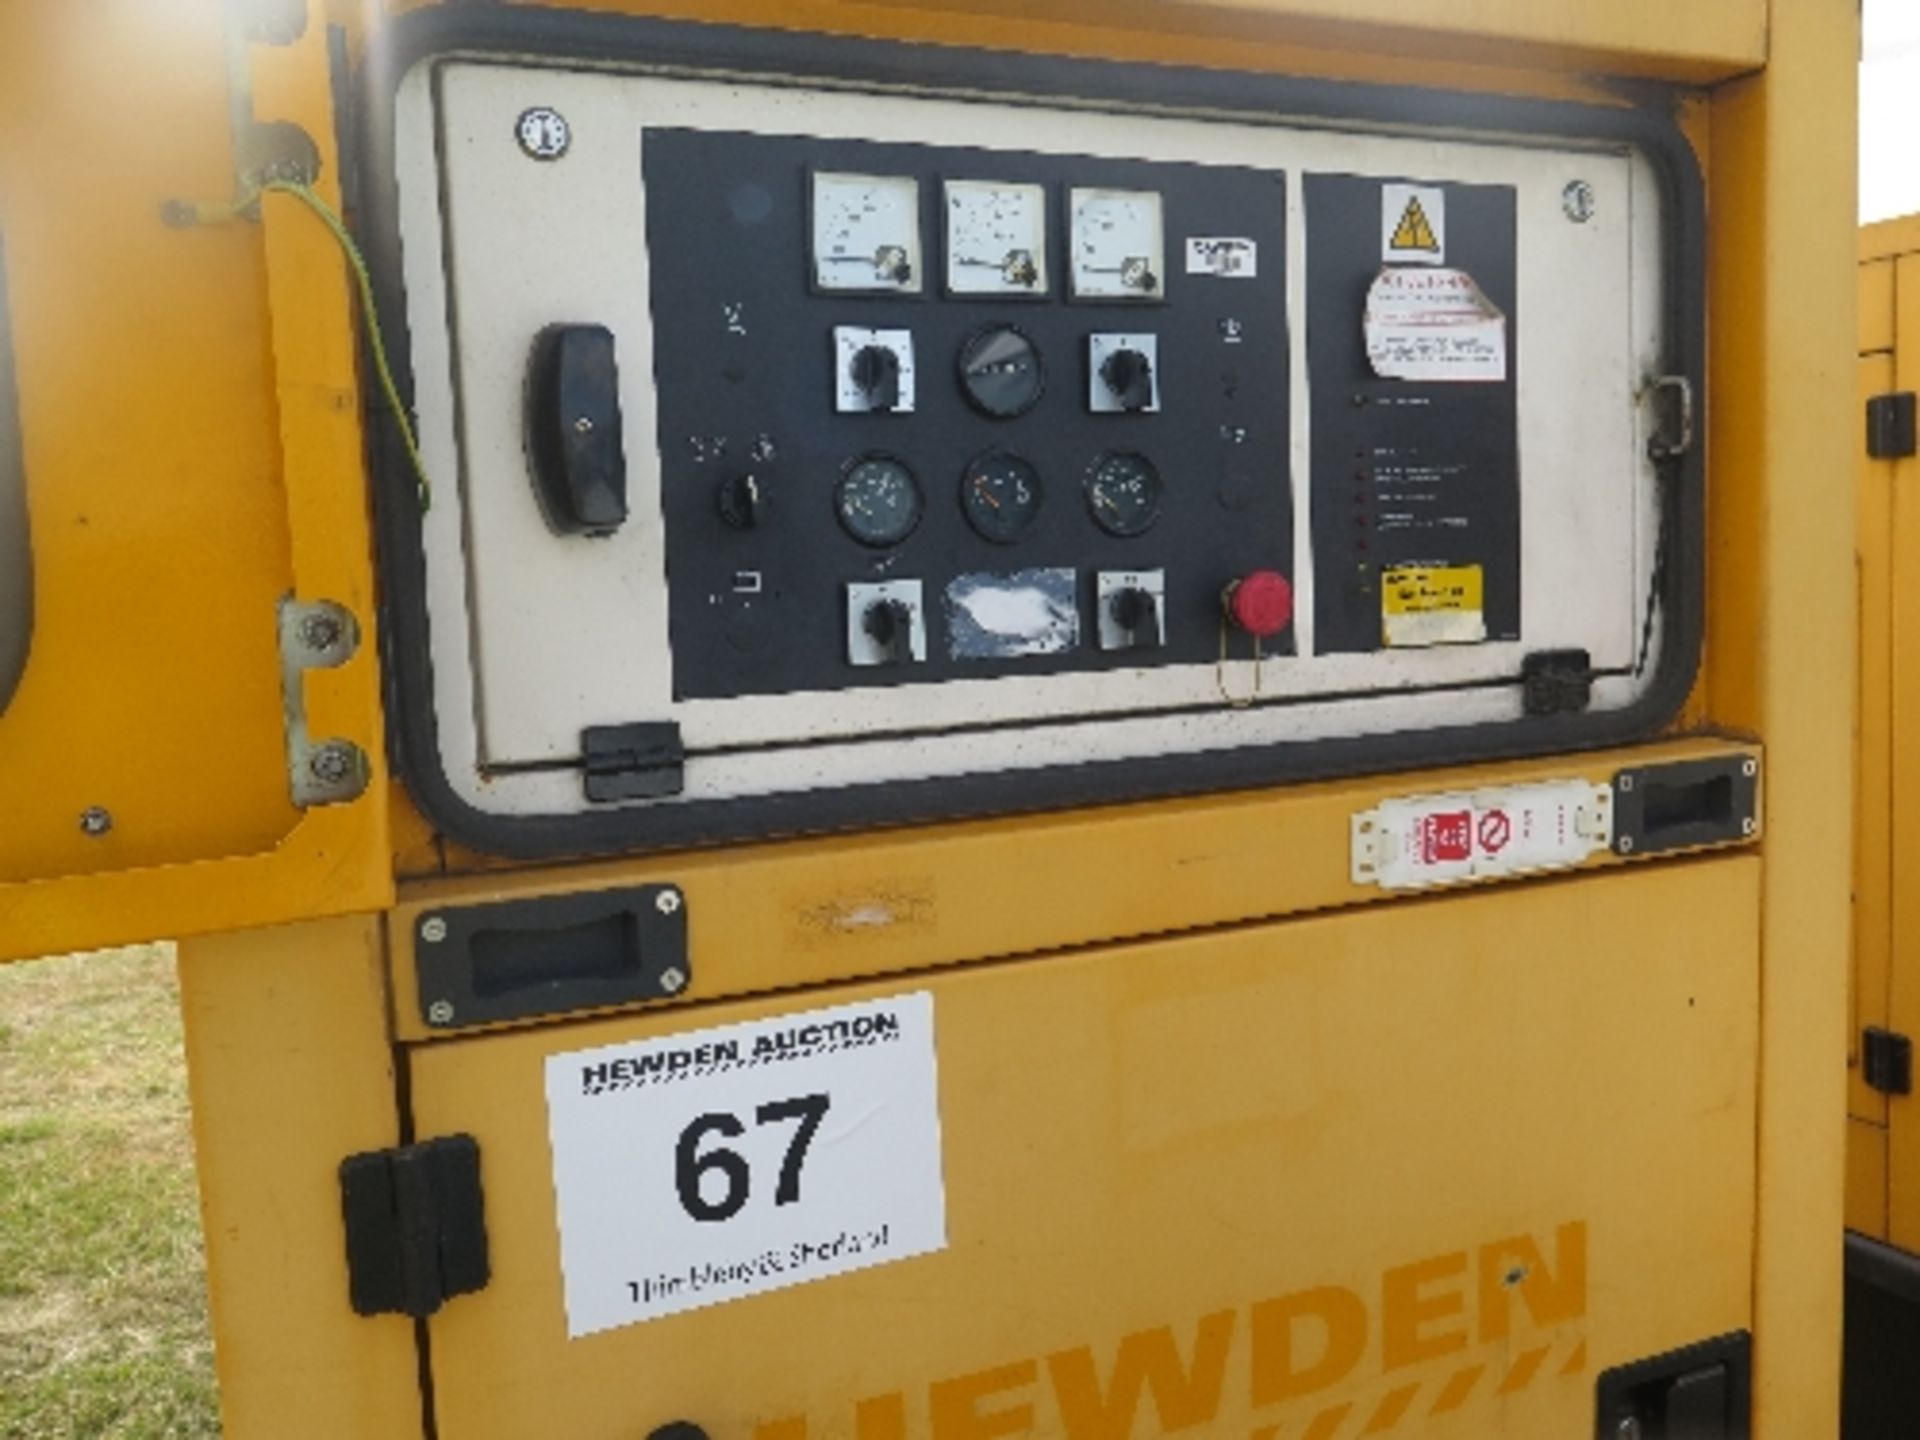 Caterpillar XQE80 generator 12997 hrs 5003857
PERKINS POWER - RUNS AND MAKES POWER
ALL LOTS are - Image 2 of 5